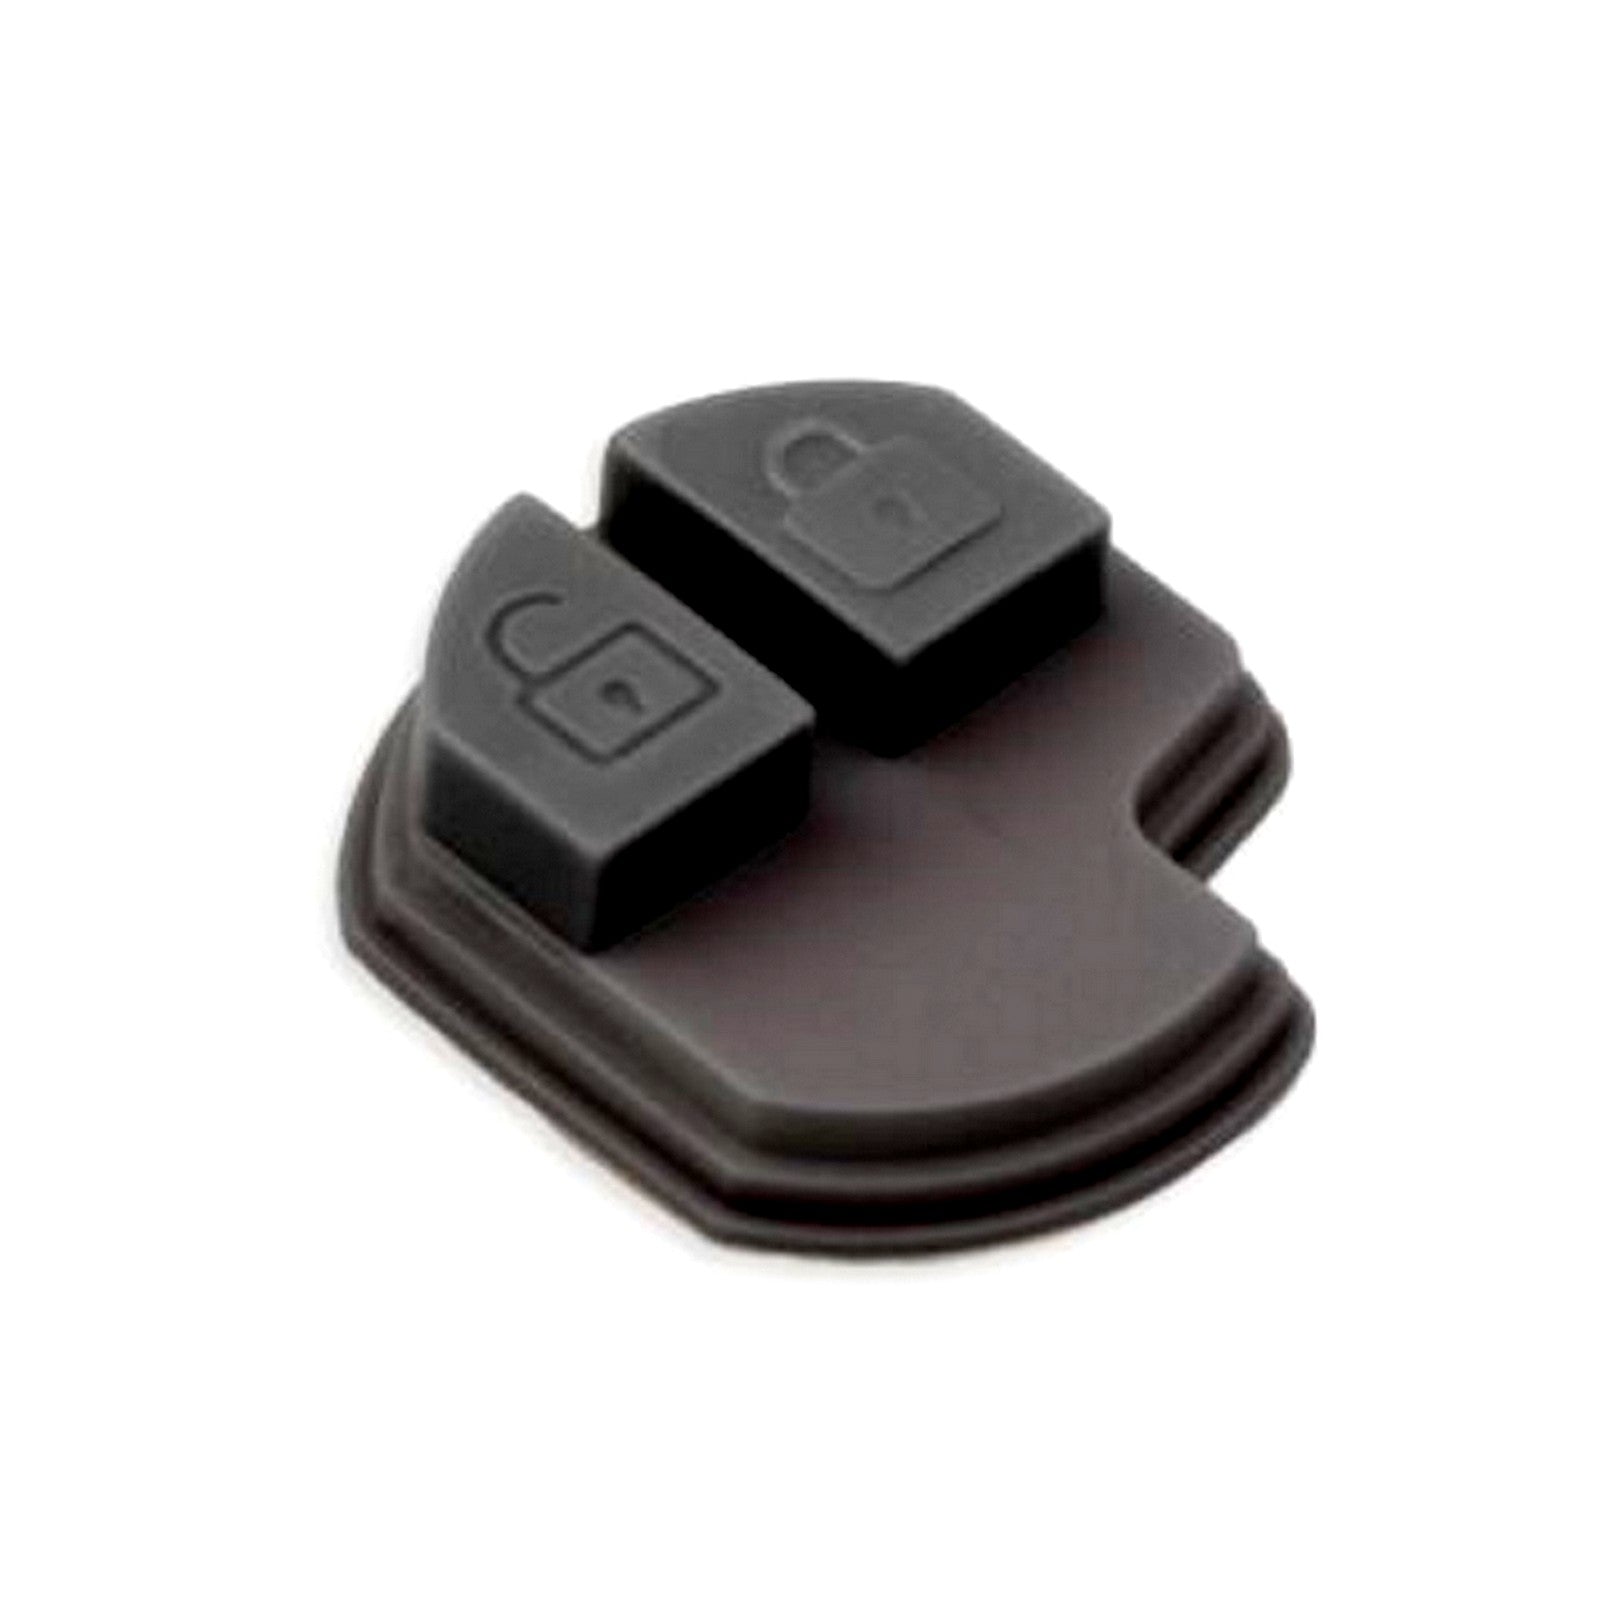 KEY COVER HARD SHELL, KEY SHELL, KEY CASE COVER FOR SUZUKI - NDE STORE